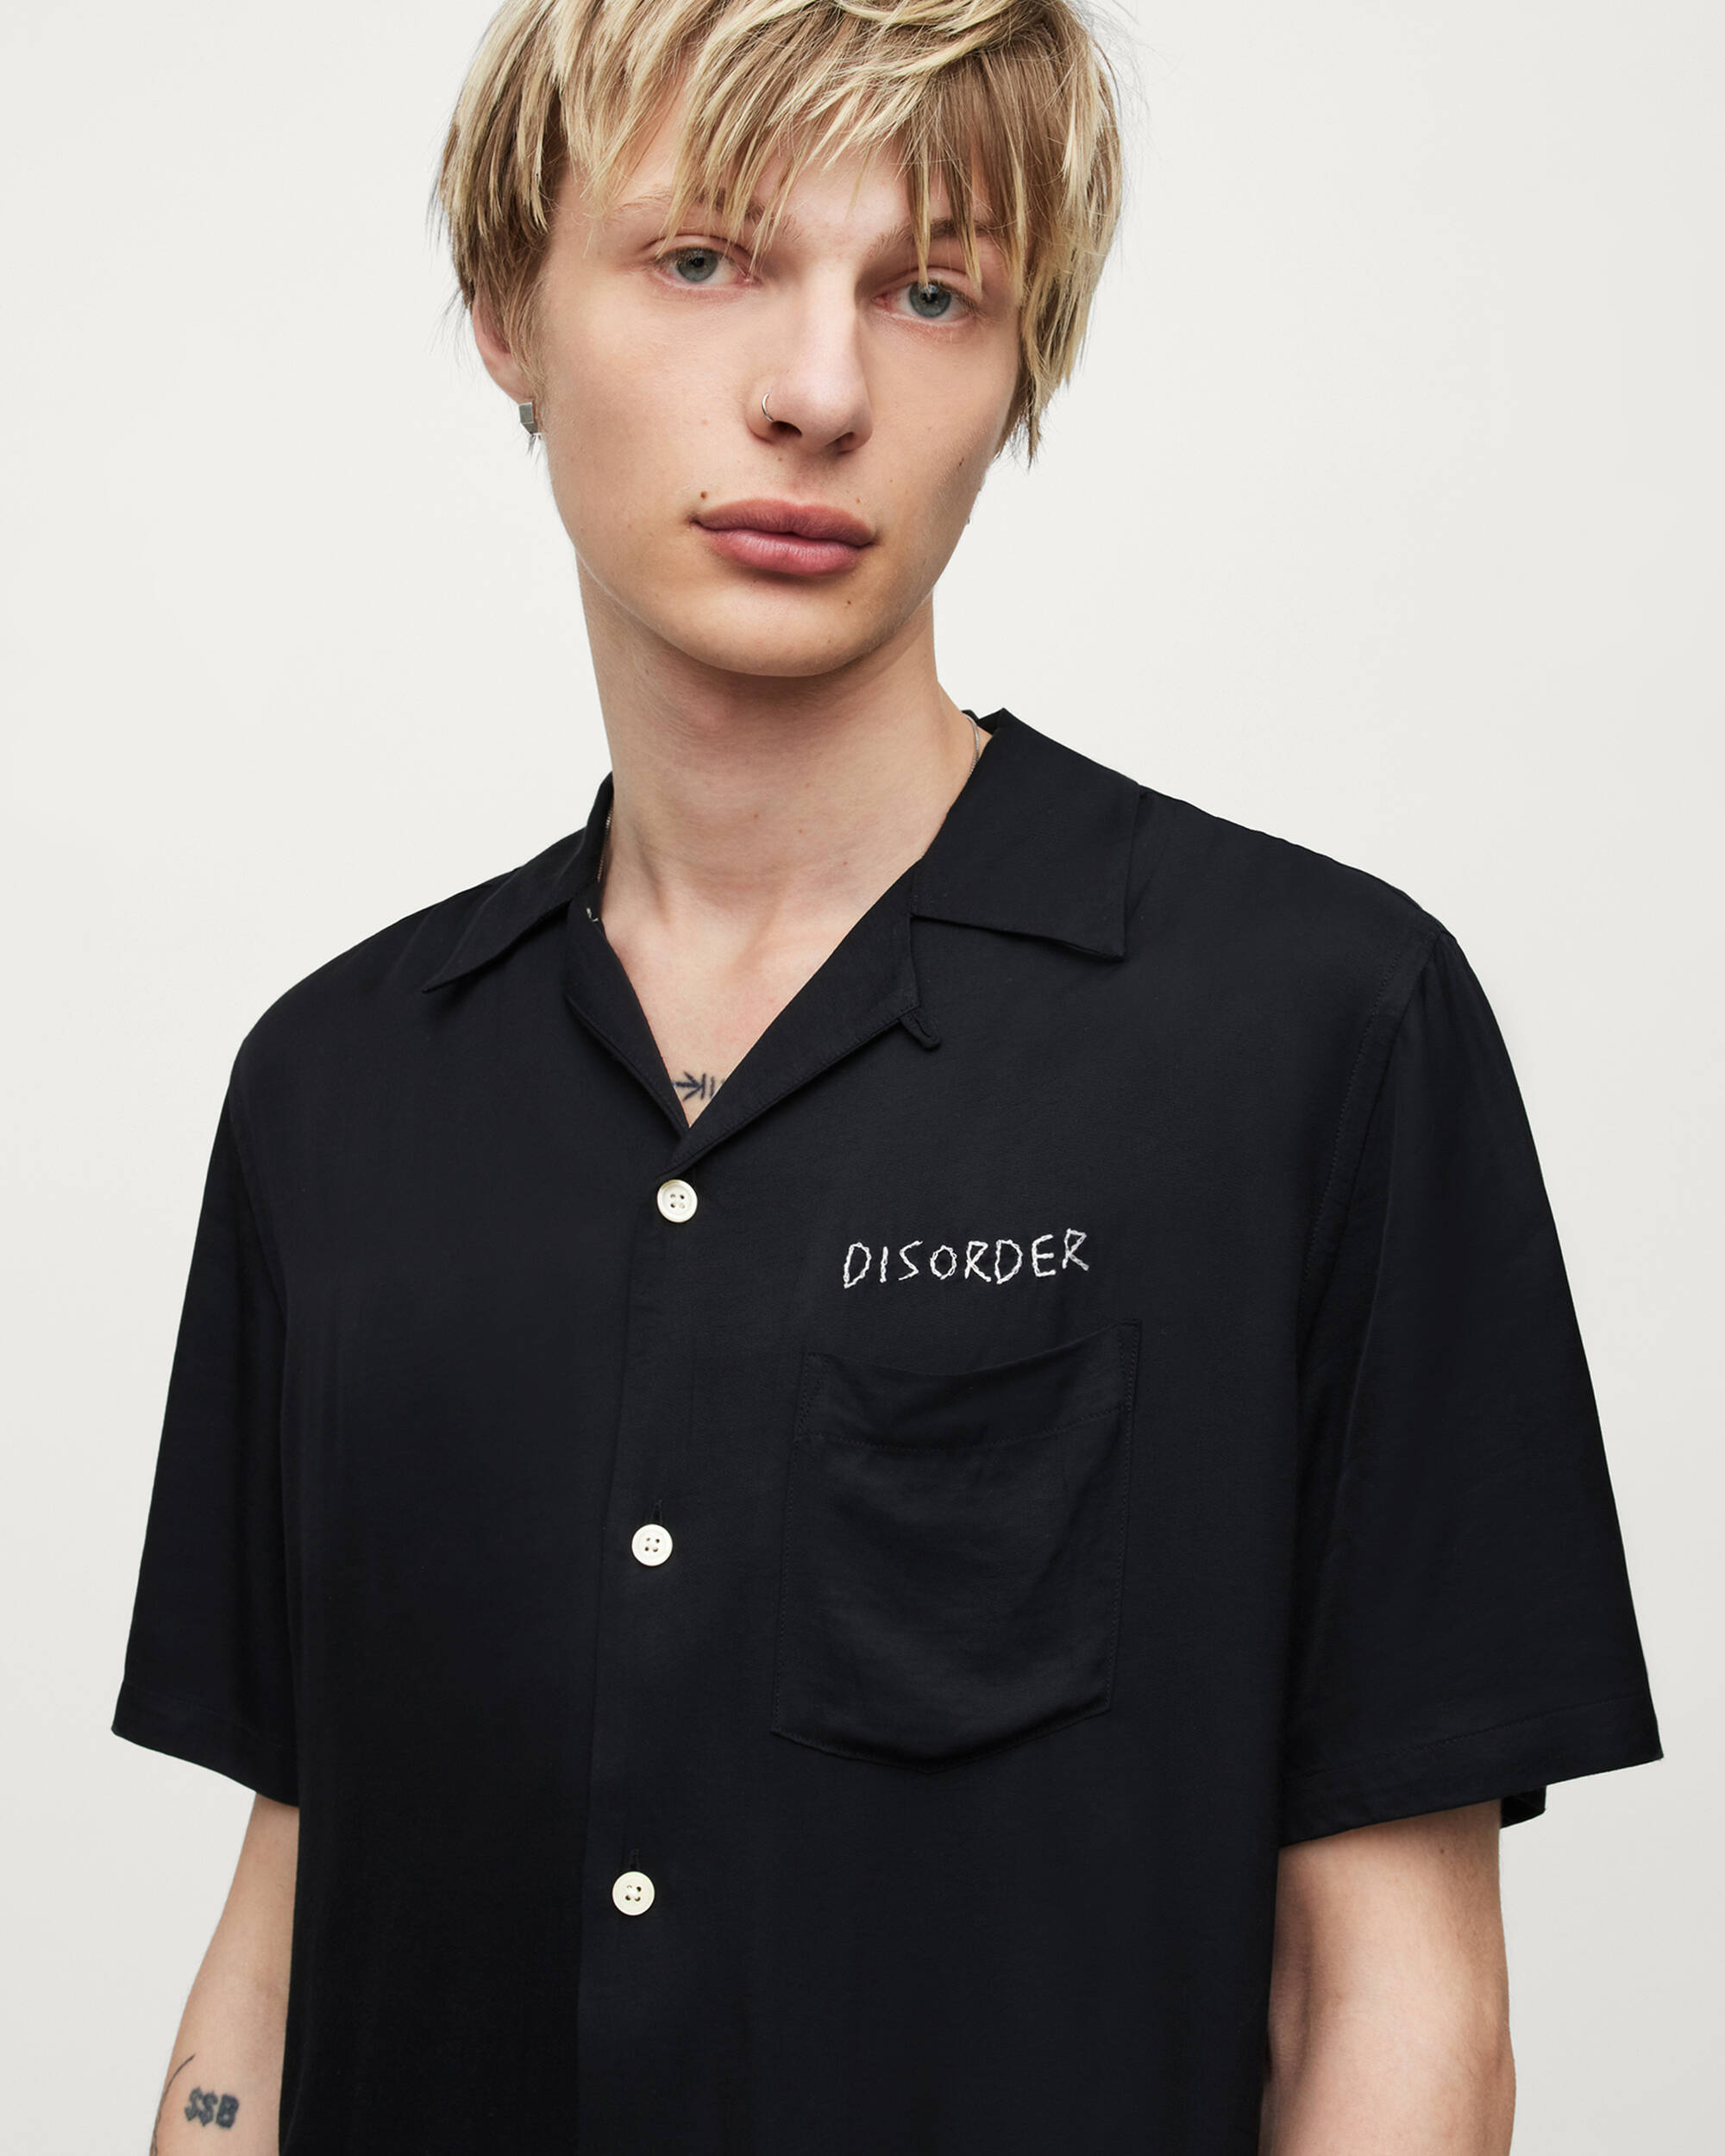 Disorder Embroidered Shirt  large image number 2